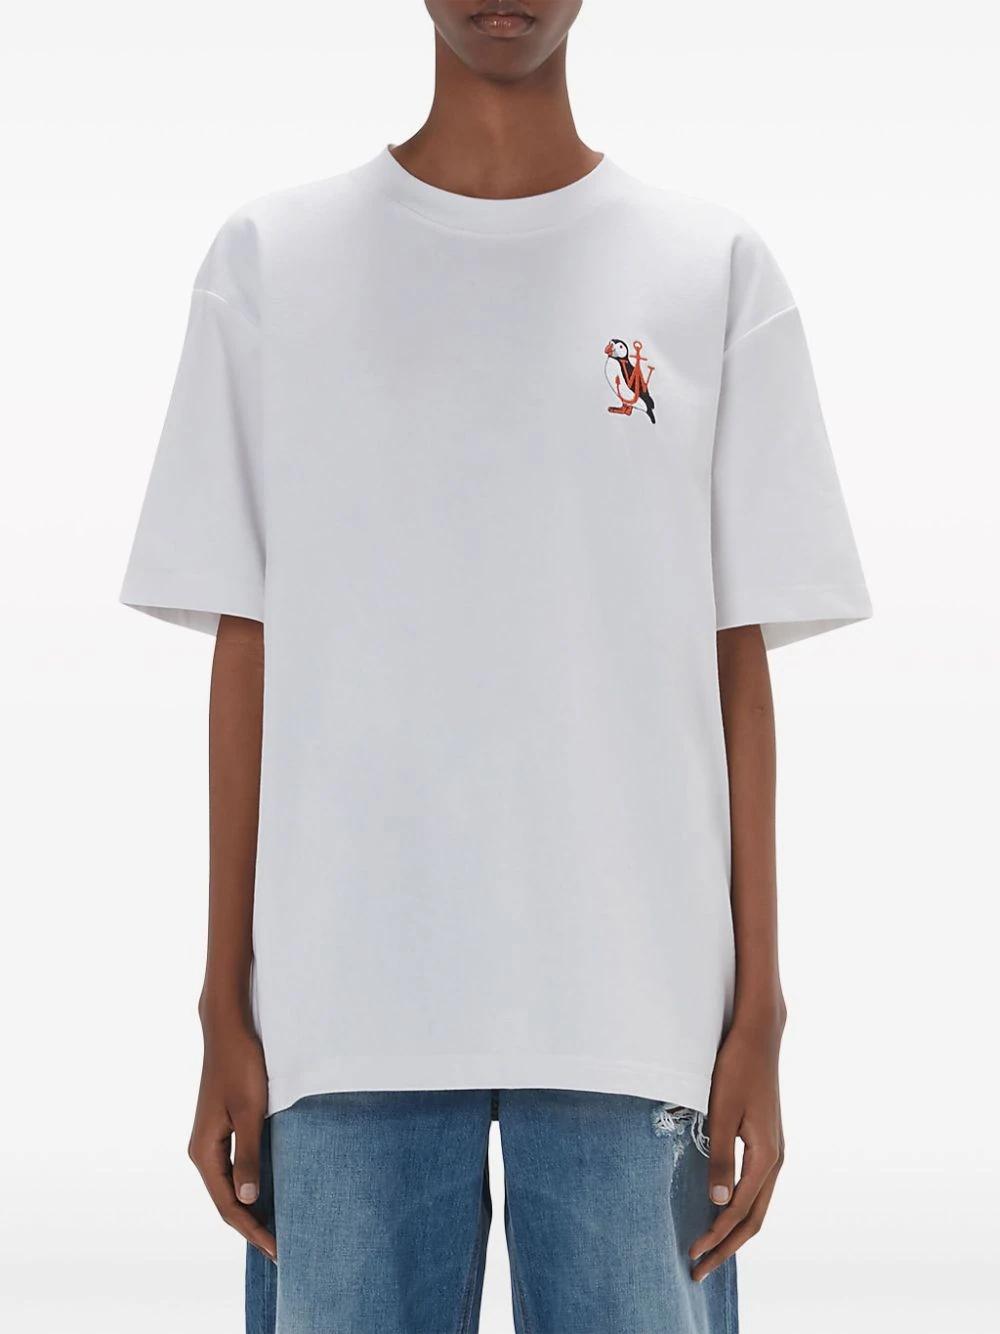 Camiseta JW Anderson Puffin Embroidery Tee Blanca